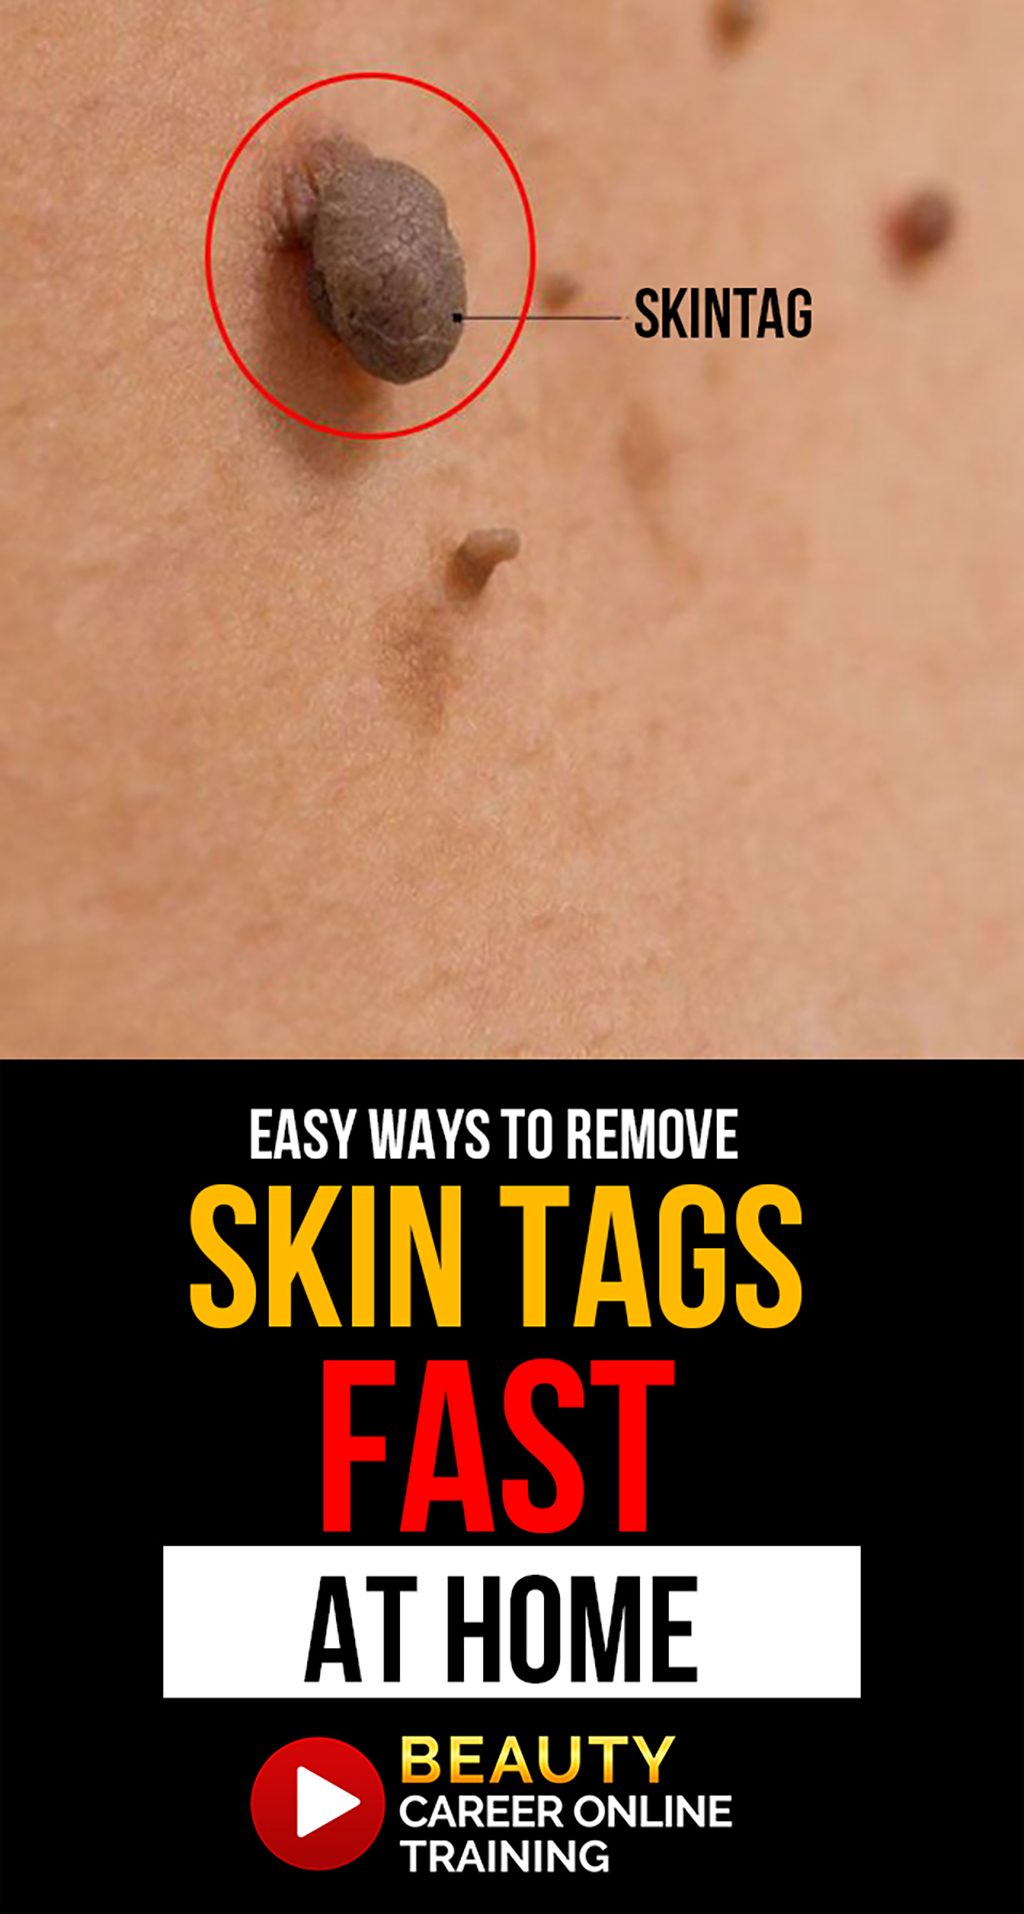 skin tag are painless, noncancerous growths on the skin, skin tag removal, DIY skin tag removal, Skin tag removal online training, plasma pen skin tag removal, plasma pen training, fibroblast plasma online training, skin growth, skin